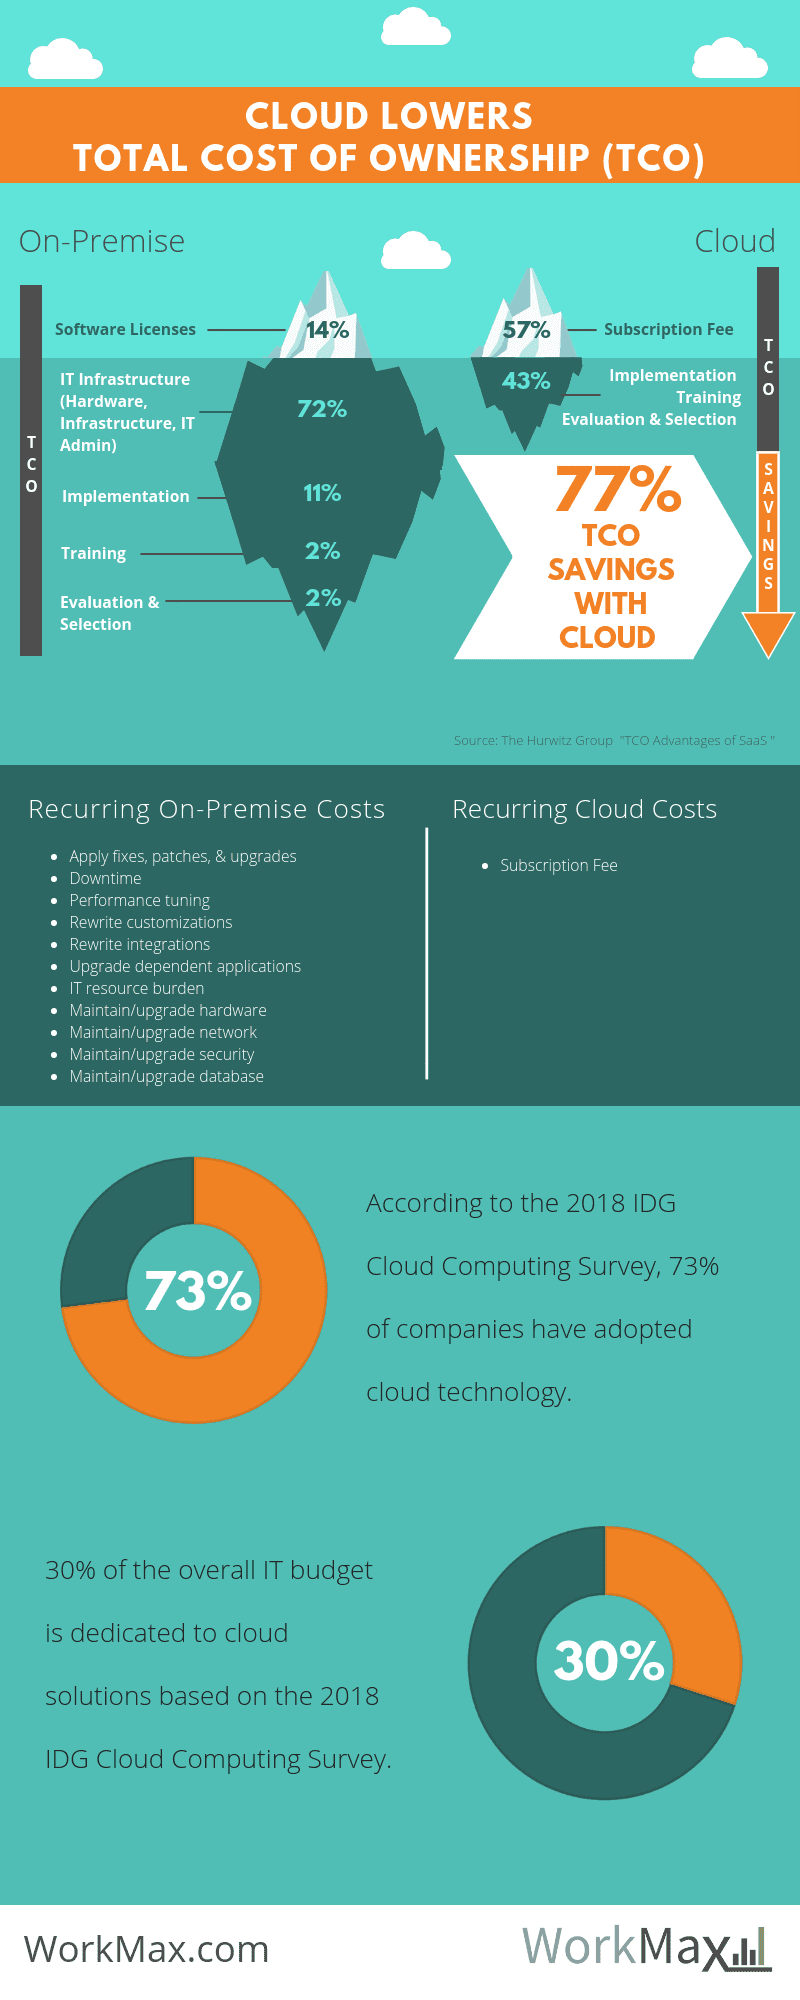 Cloud lowers Total Cost of Ownership